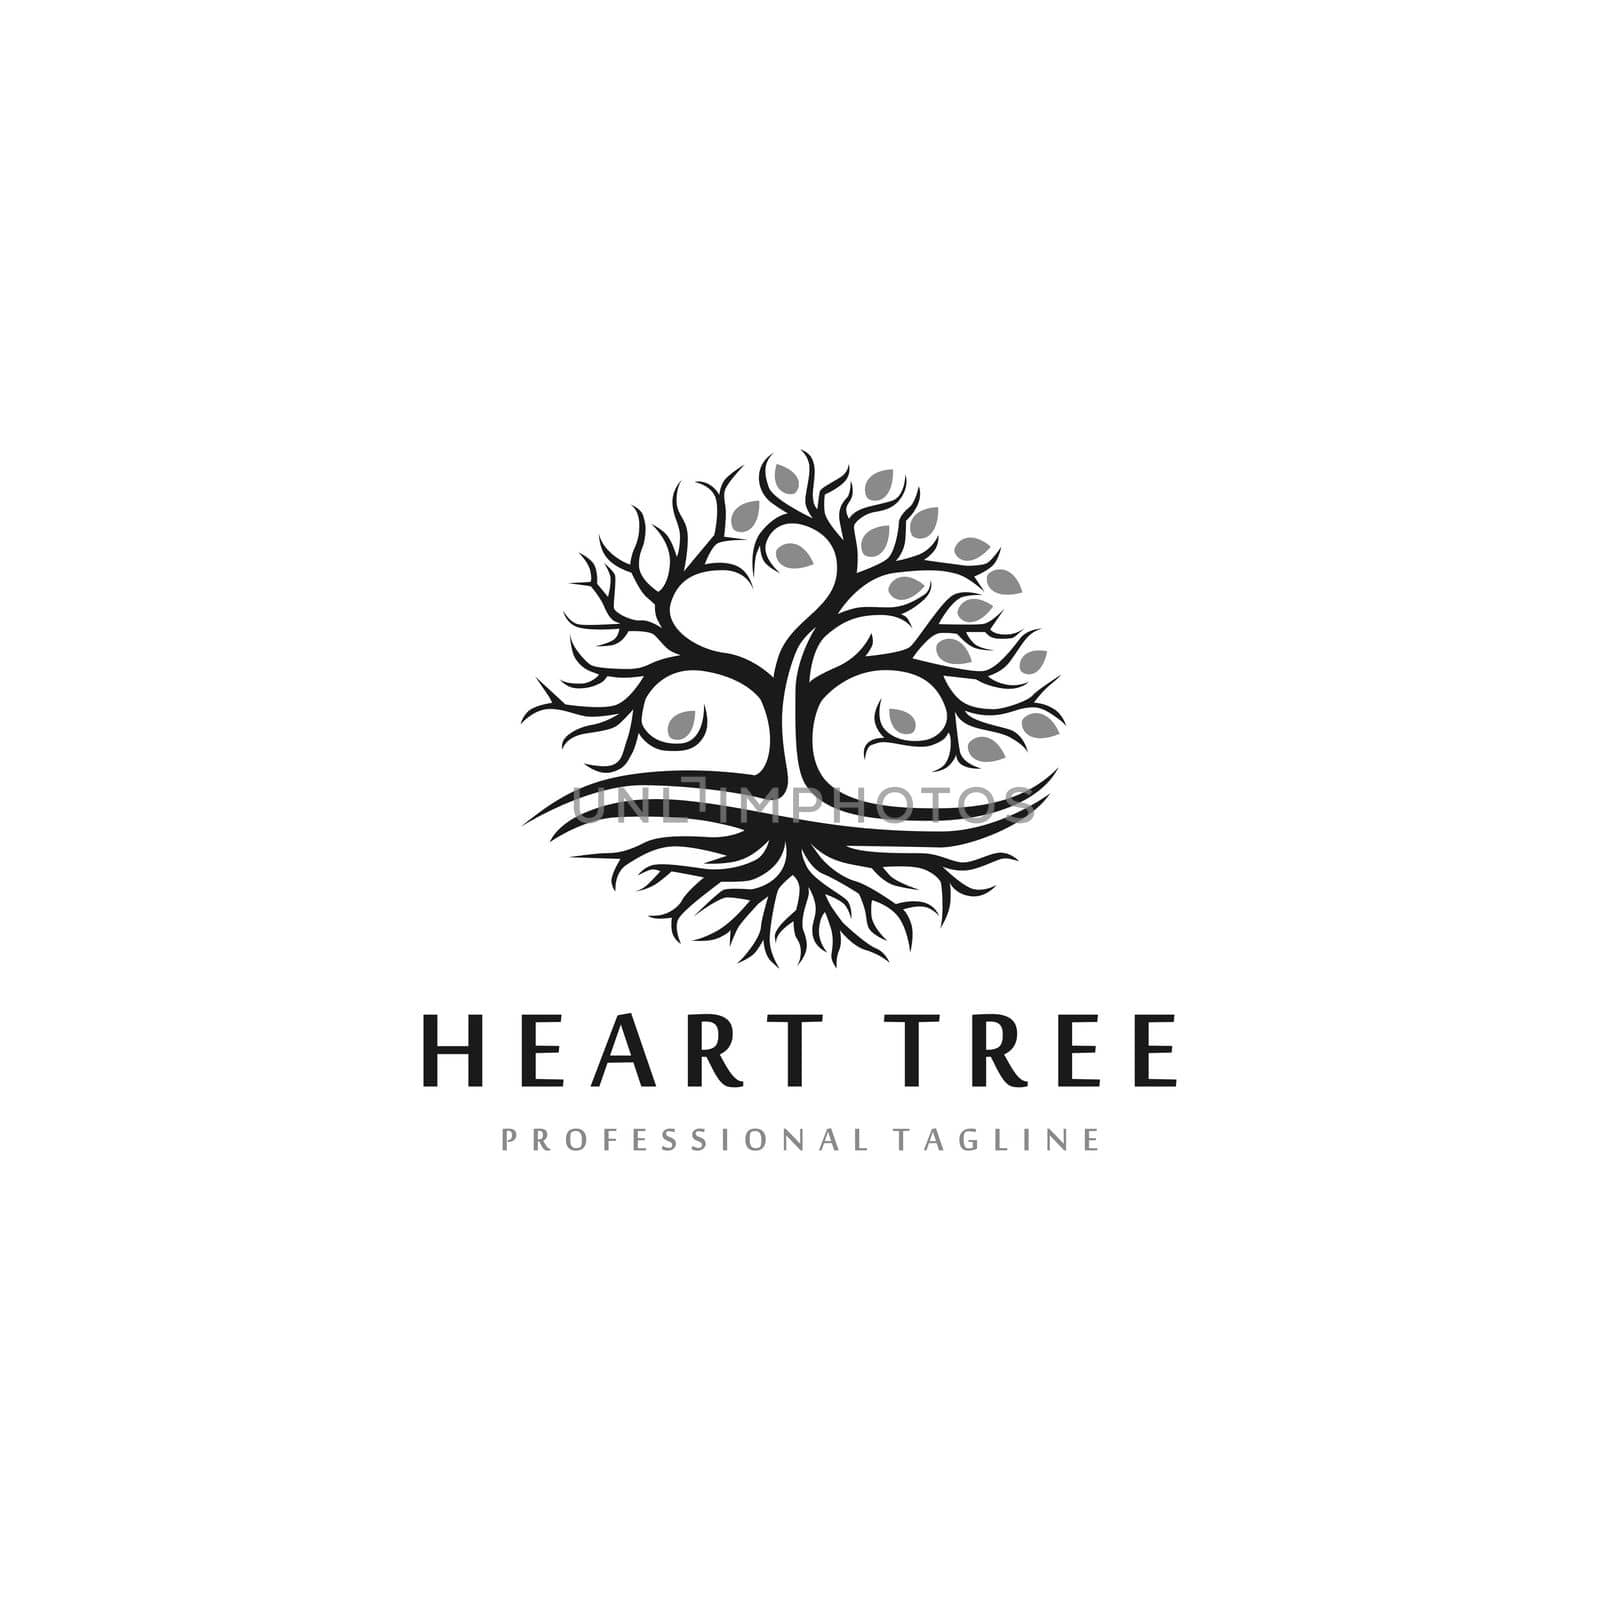 heart tree icon isolated logo design template. for natural organic business